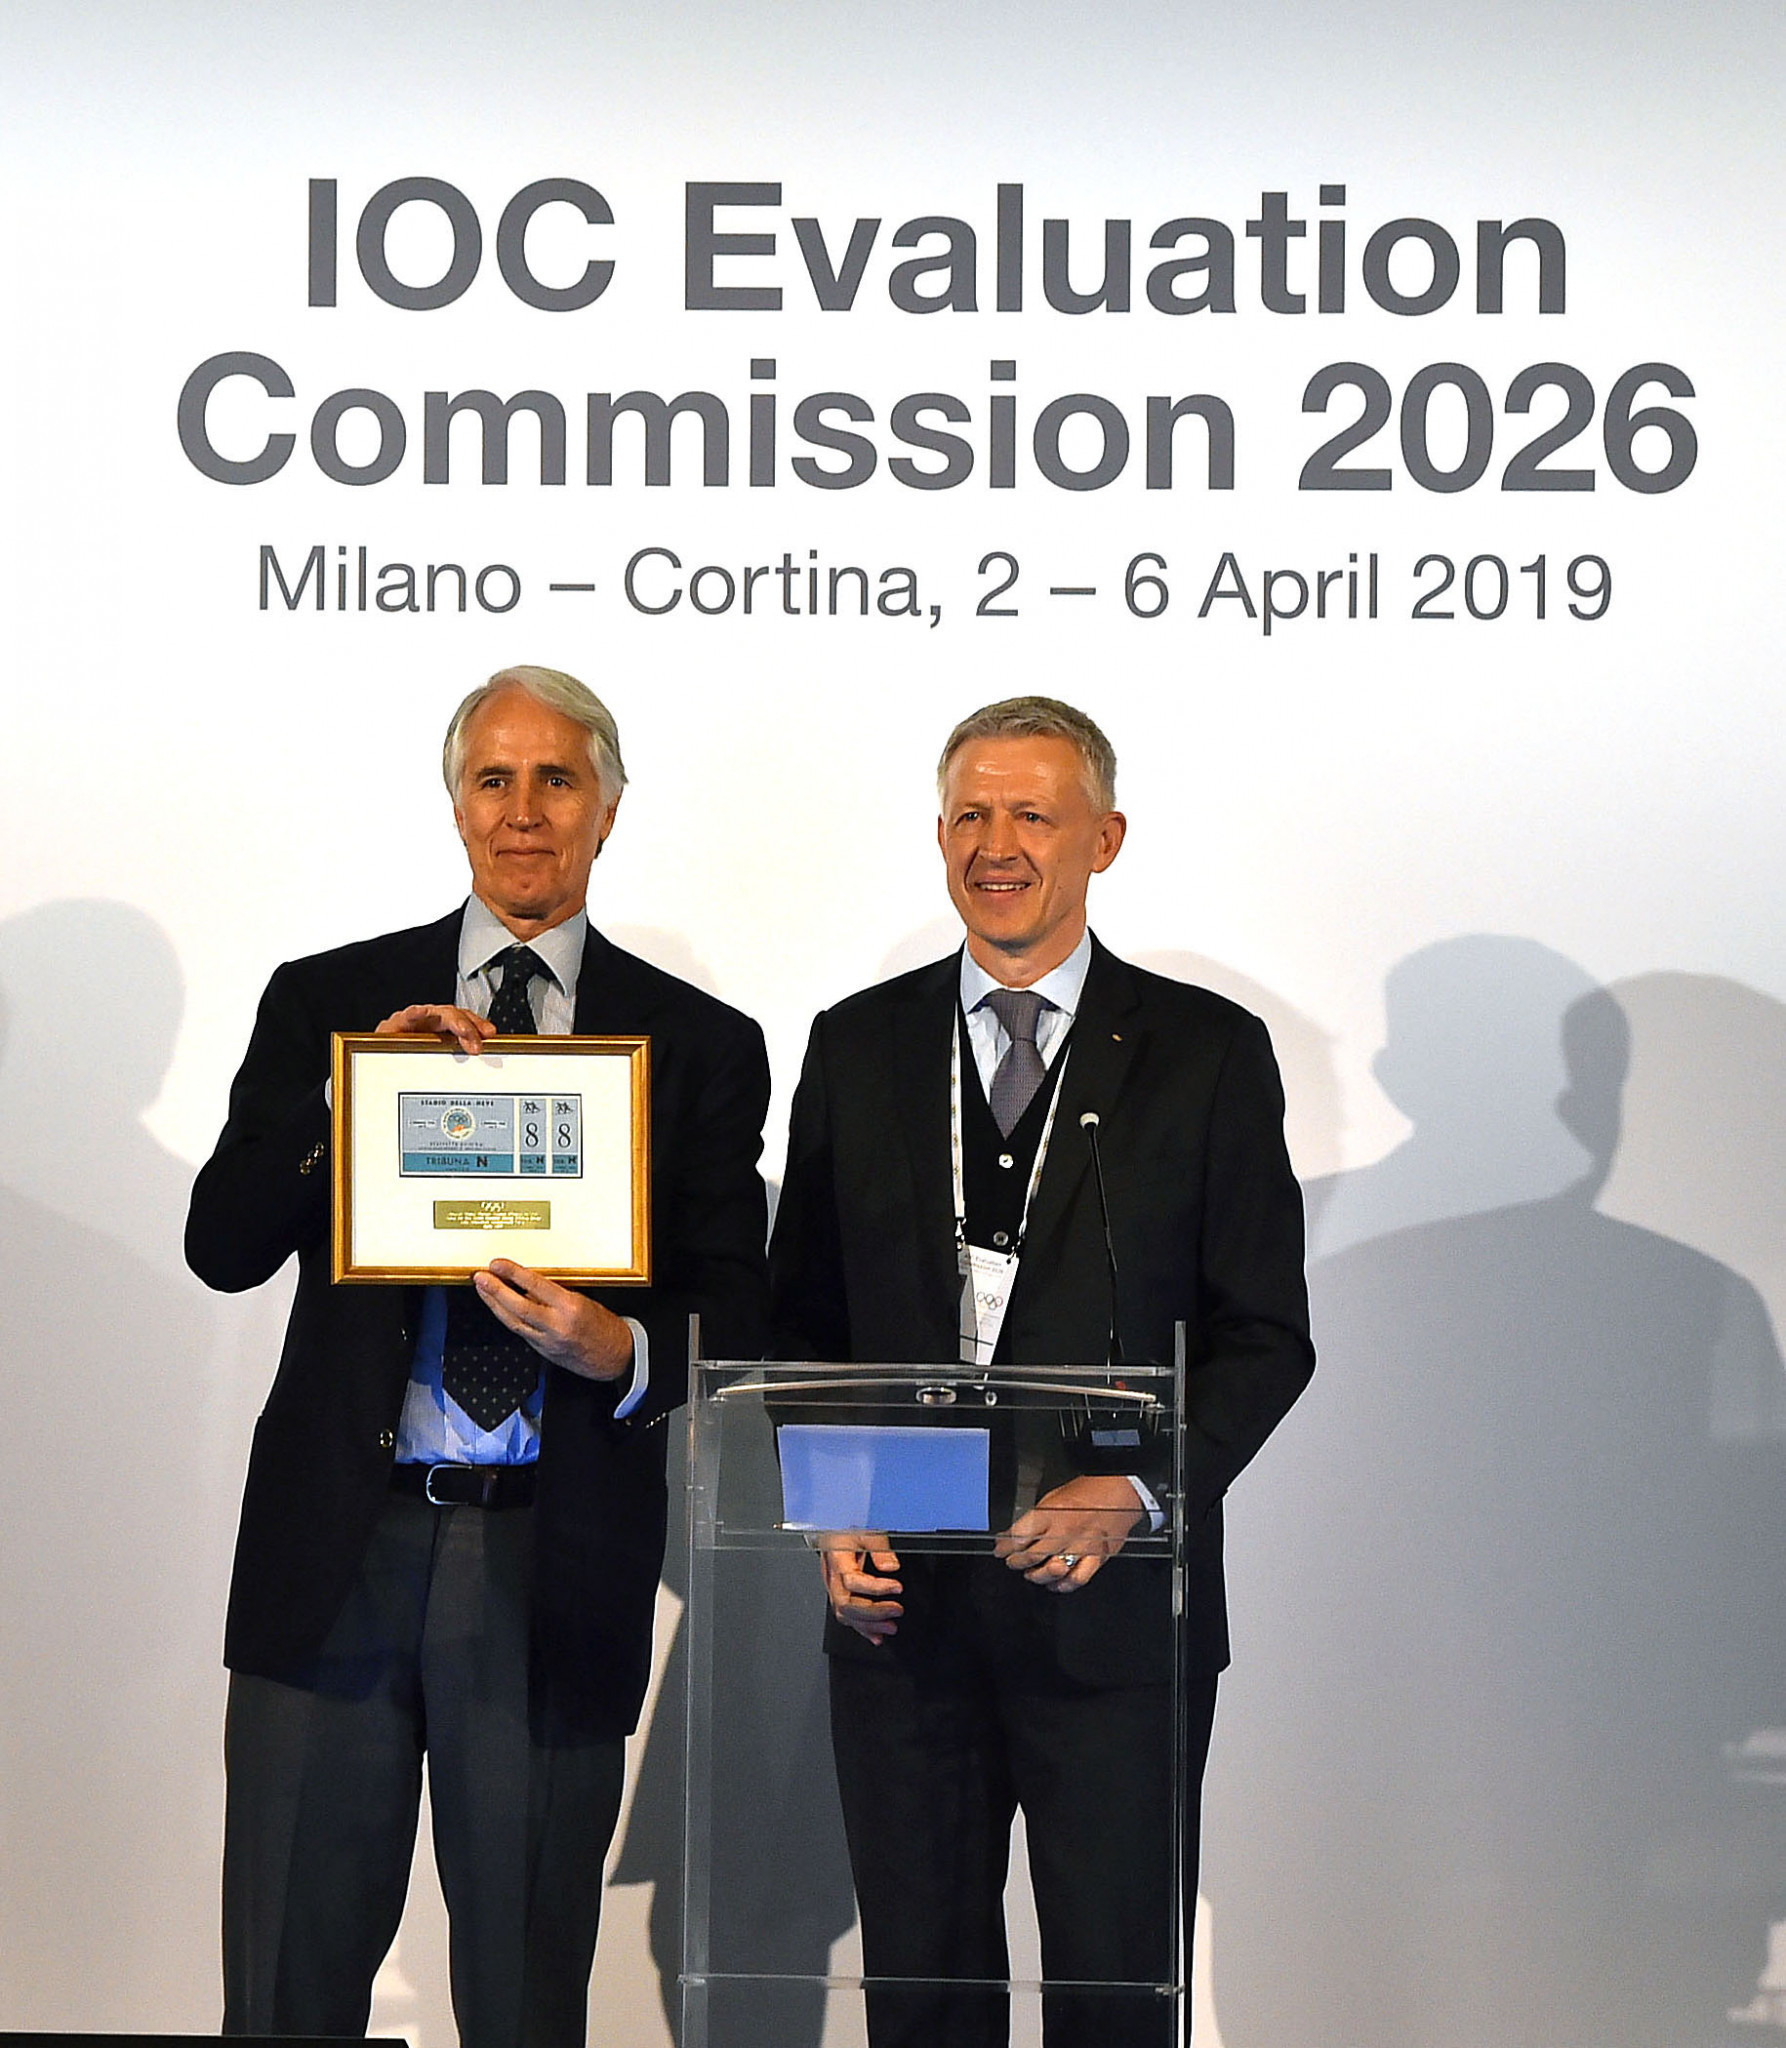 Presents exchanged as IOC Evaluation Commission visit to Milan Cortina 2026 comes to an end